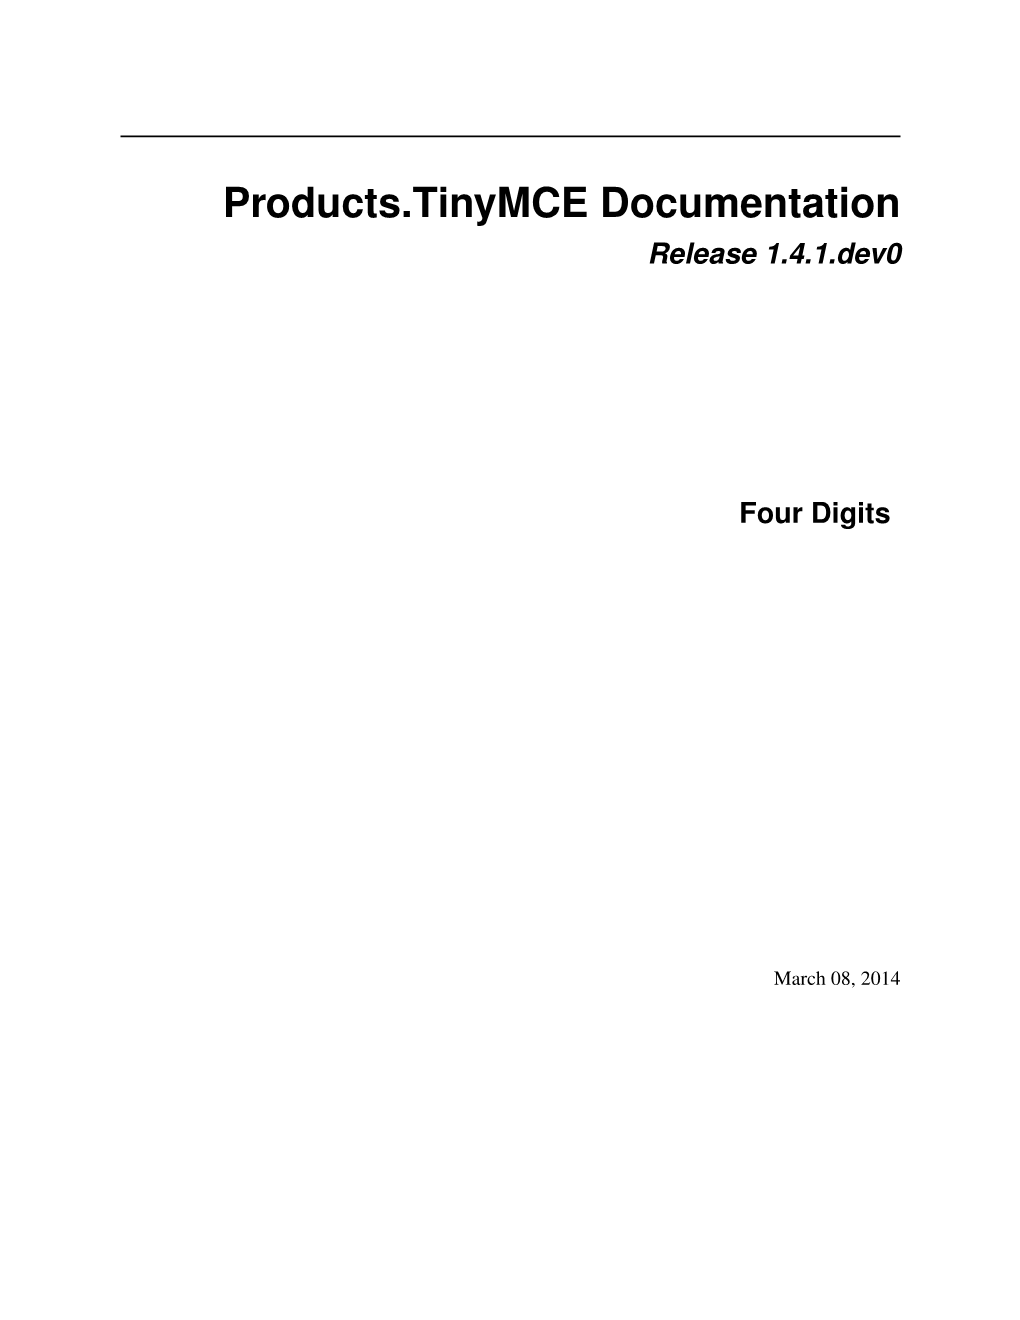 Products.Tinymce Documentation Release 1.4.1.Dev0